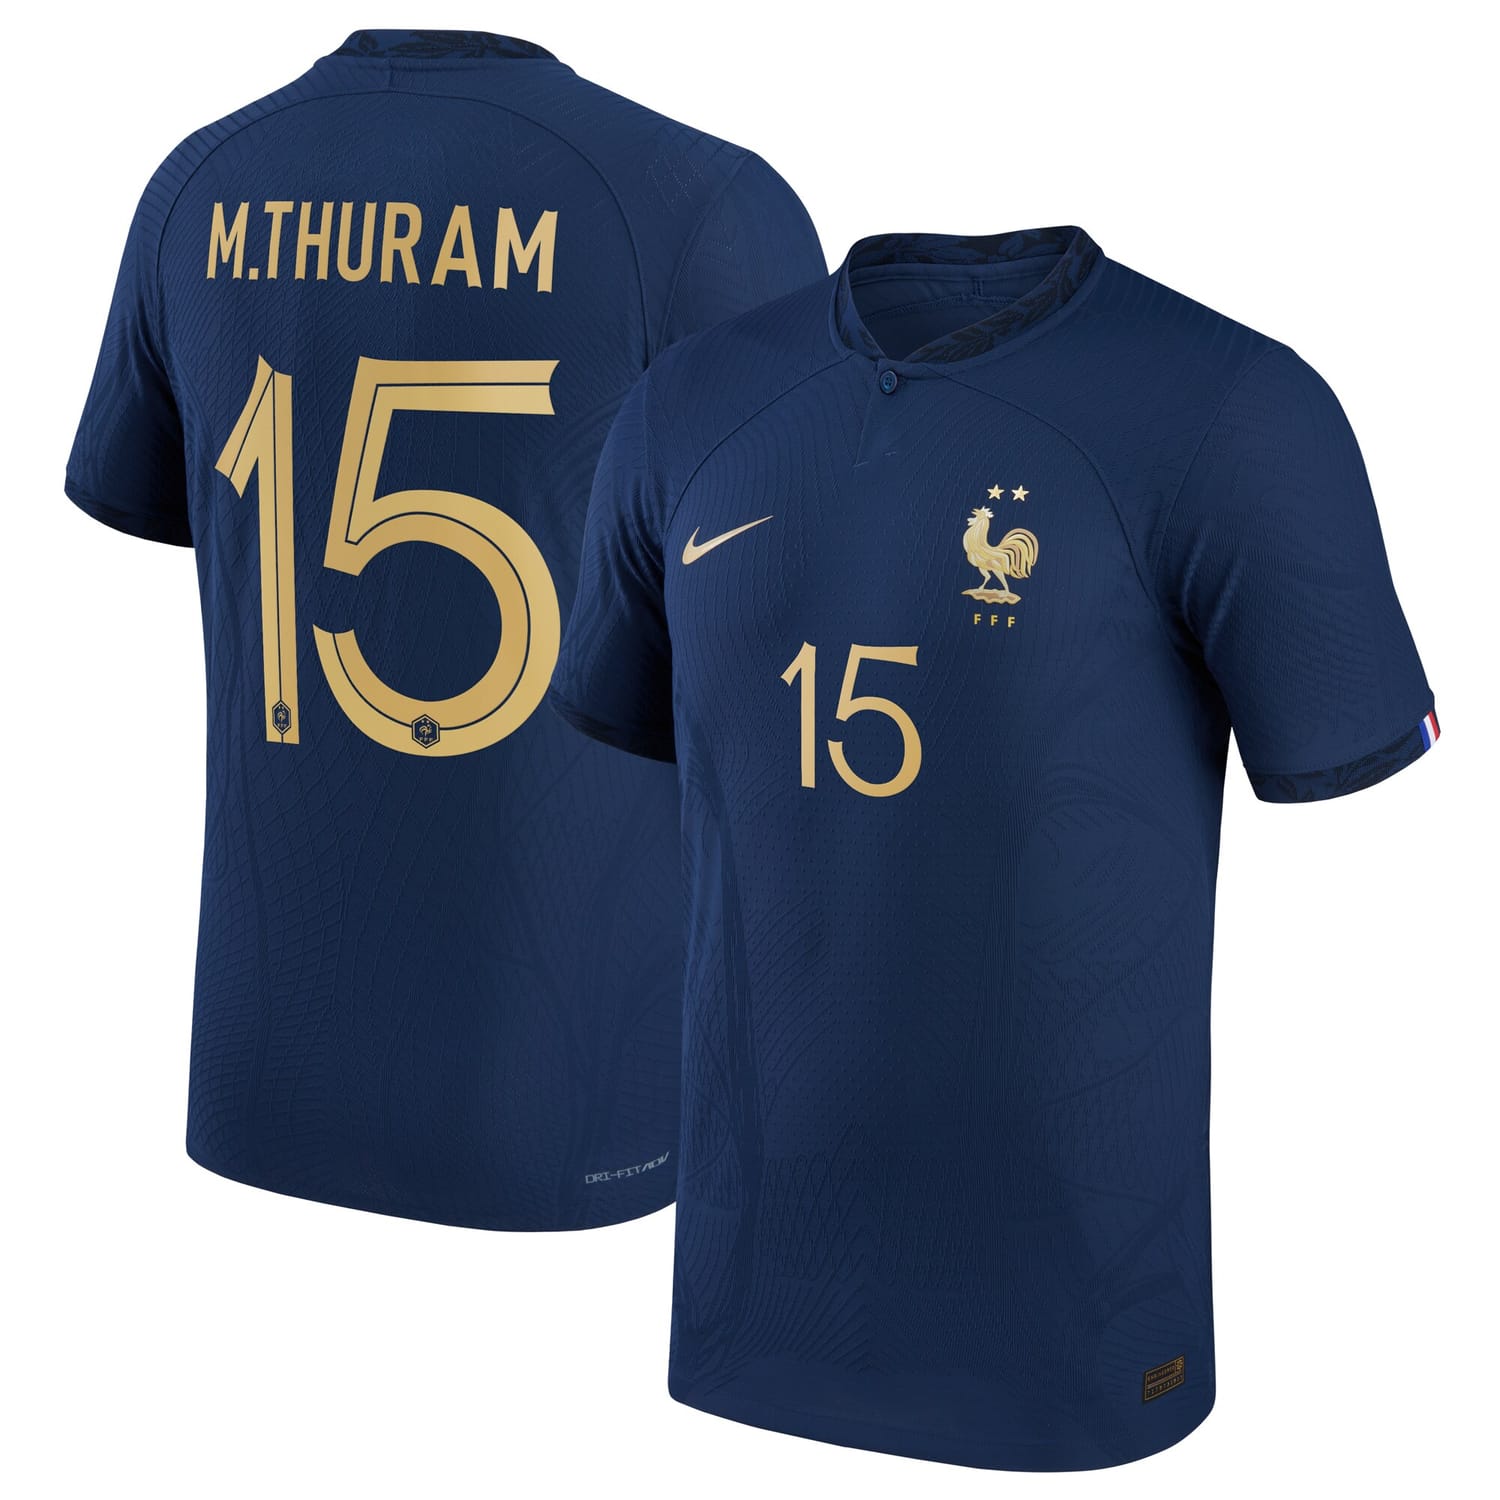 France National Team Home Authentic Jersey Shirt 2022 player Marcus Thuram 15 printing for Men